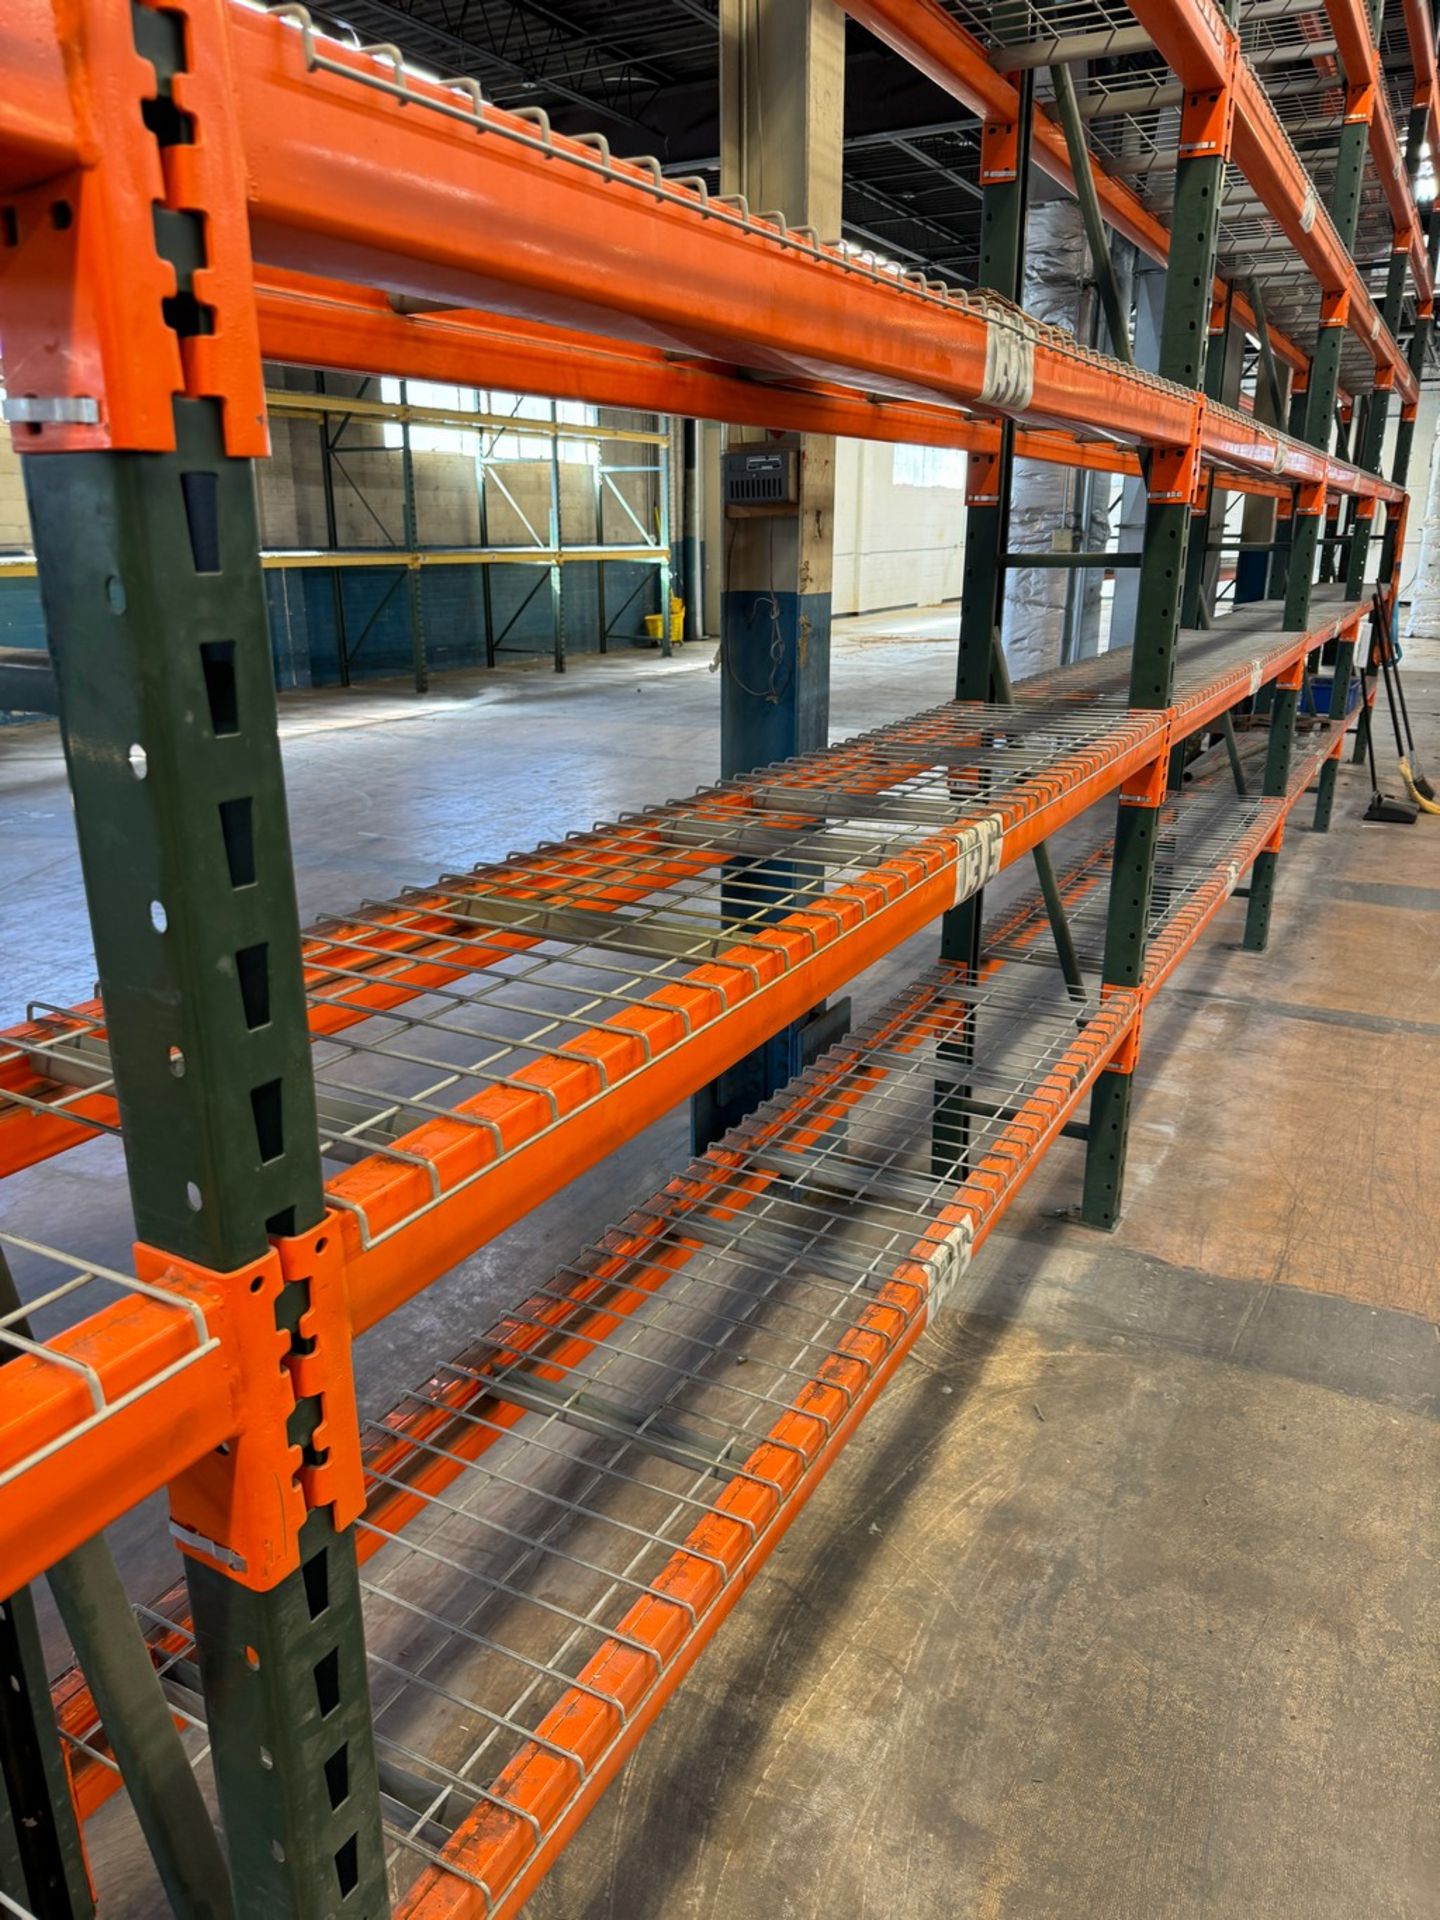 5-Sections Heavy Duty Pallet Racking, 96"W x 18"D x 168"H, 3000 LB Weight Capacity - Image 2 of 3